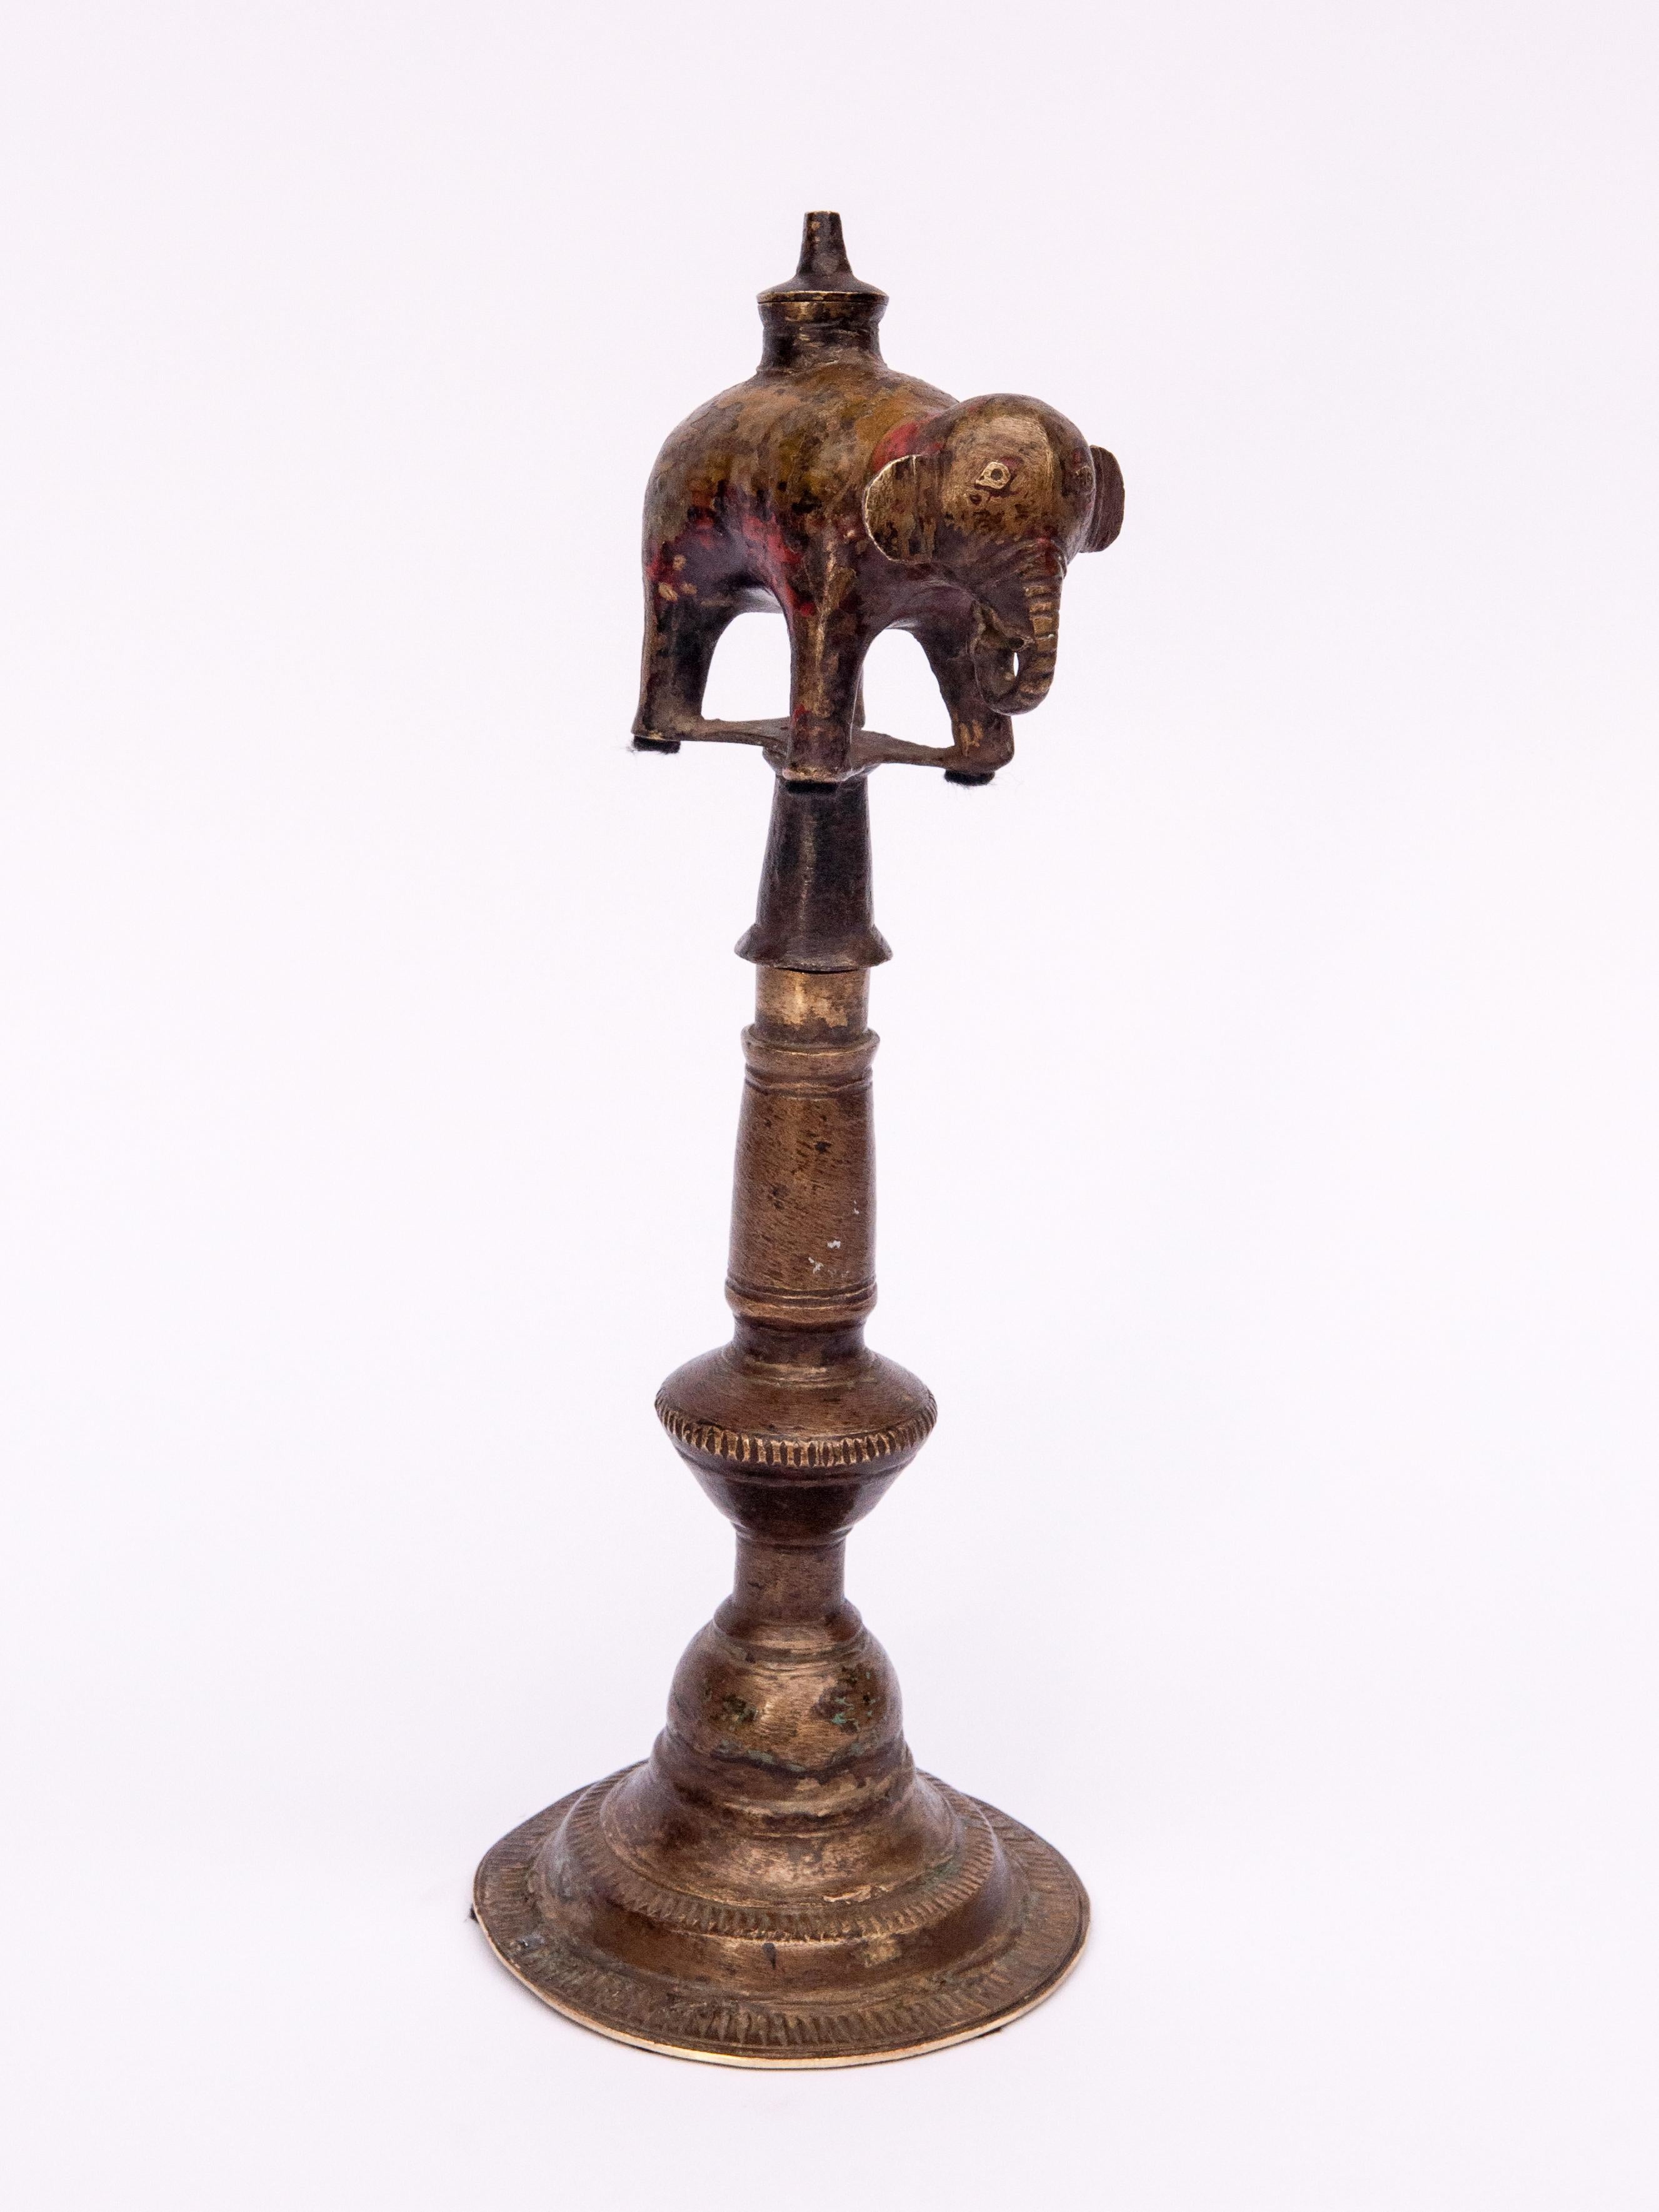 Vintage bronze oil lamp elephant motif. West Nepal, mid-20th century.
This charming elephant lamp comes from the mountains of west Nepal. It was handcrafted in bronze by village craftsmen utilizing basic casting tools and methods, and reflects the